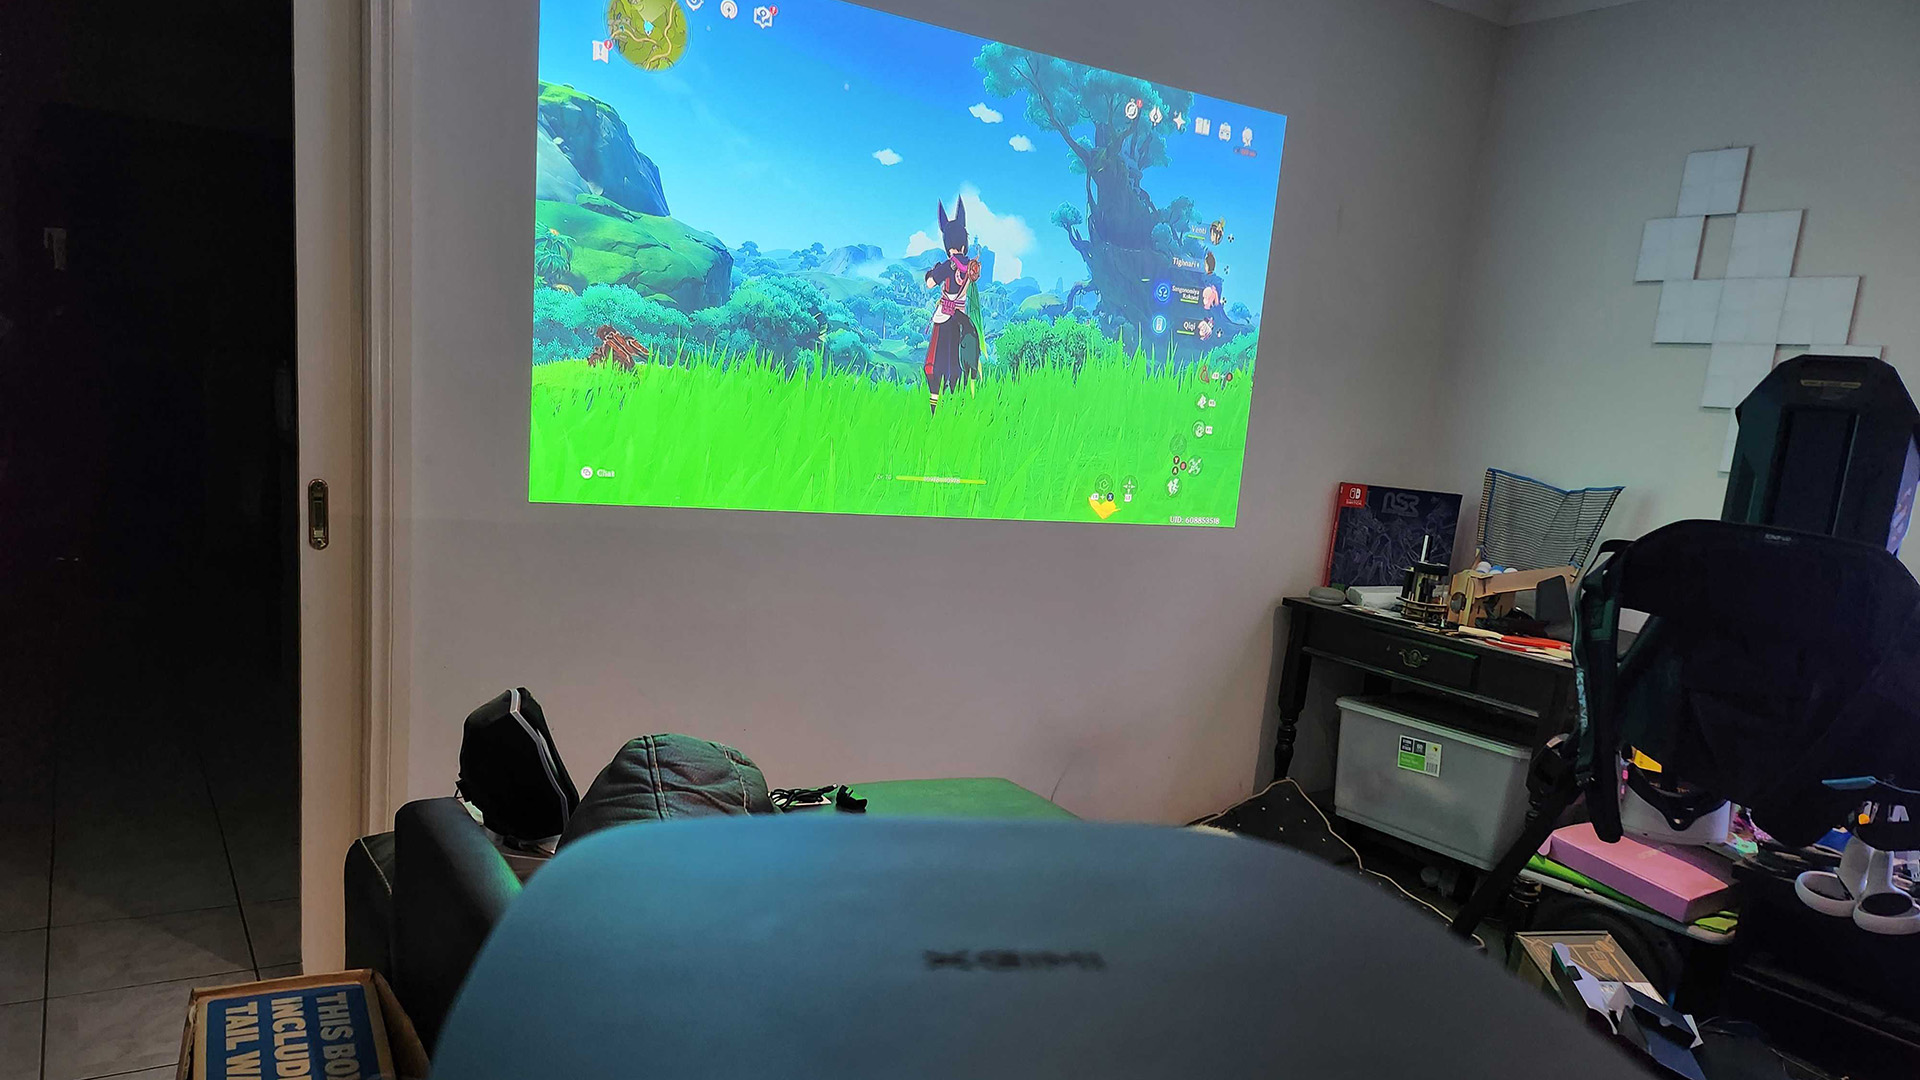 Xgimi Horizon Pro projector setup in house.